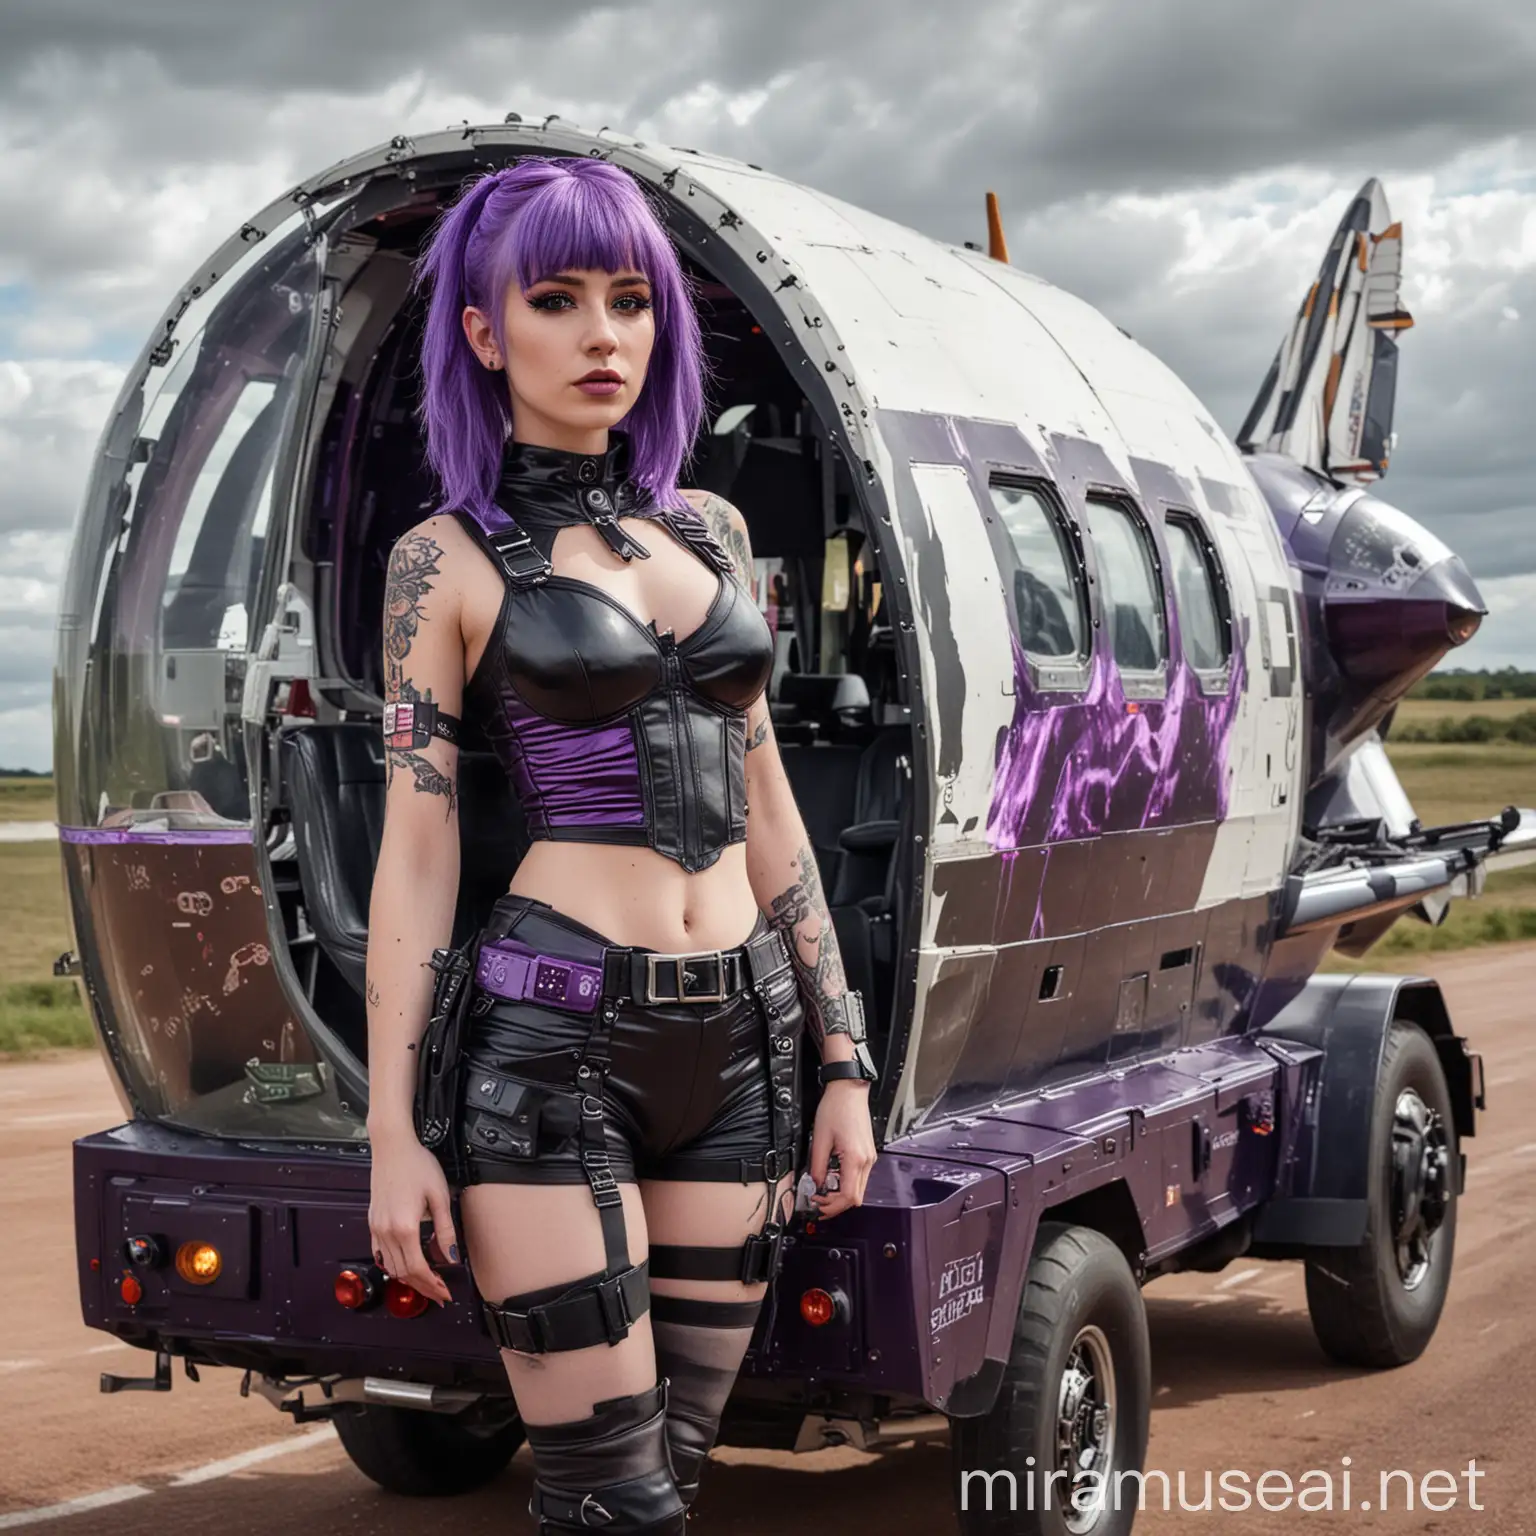 Goth Woman Driving Horsebox with Space Shuttle Escape Pod